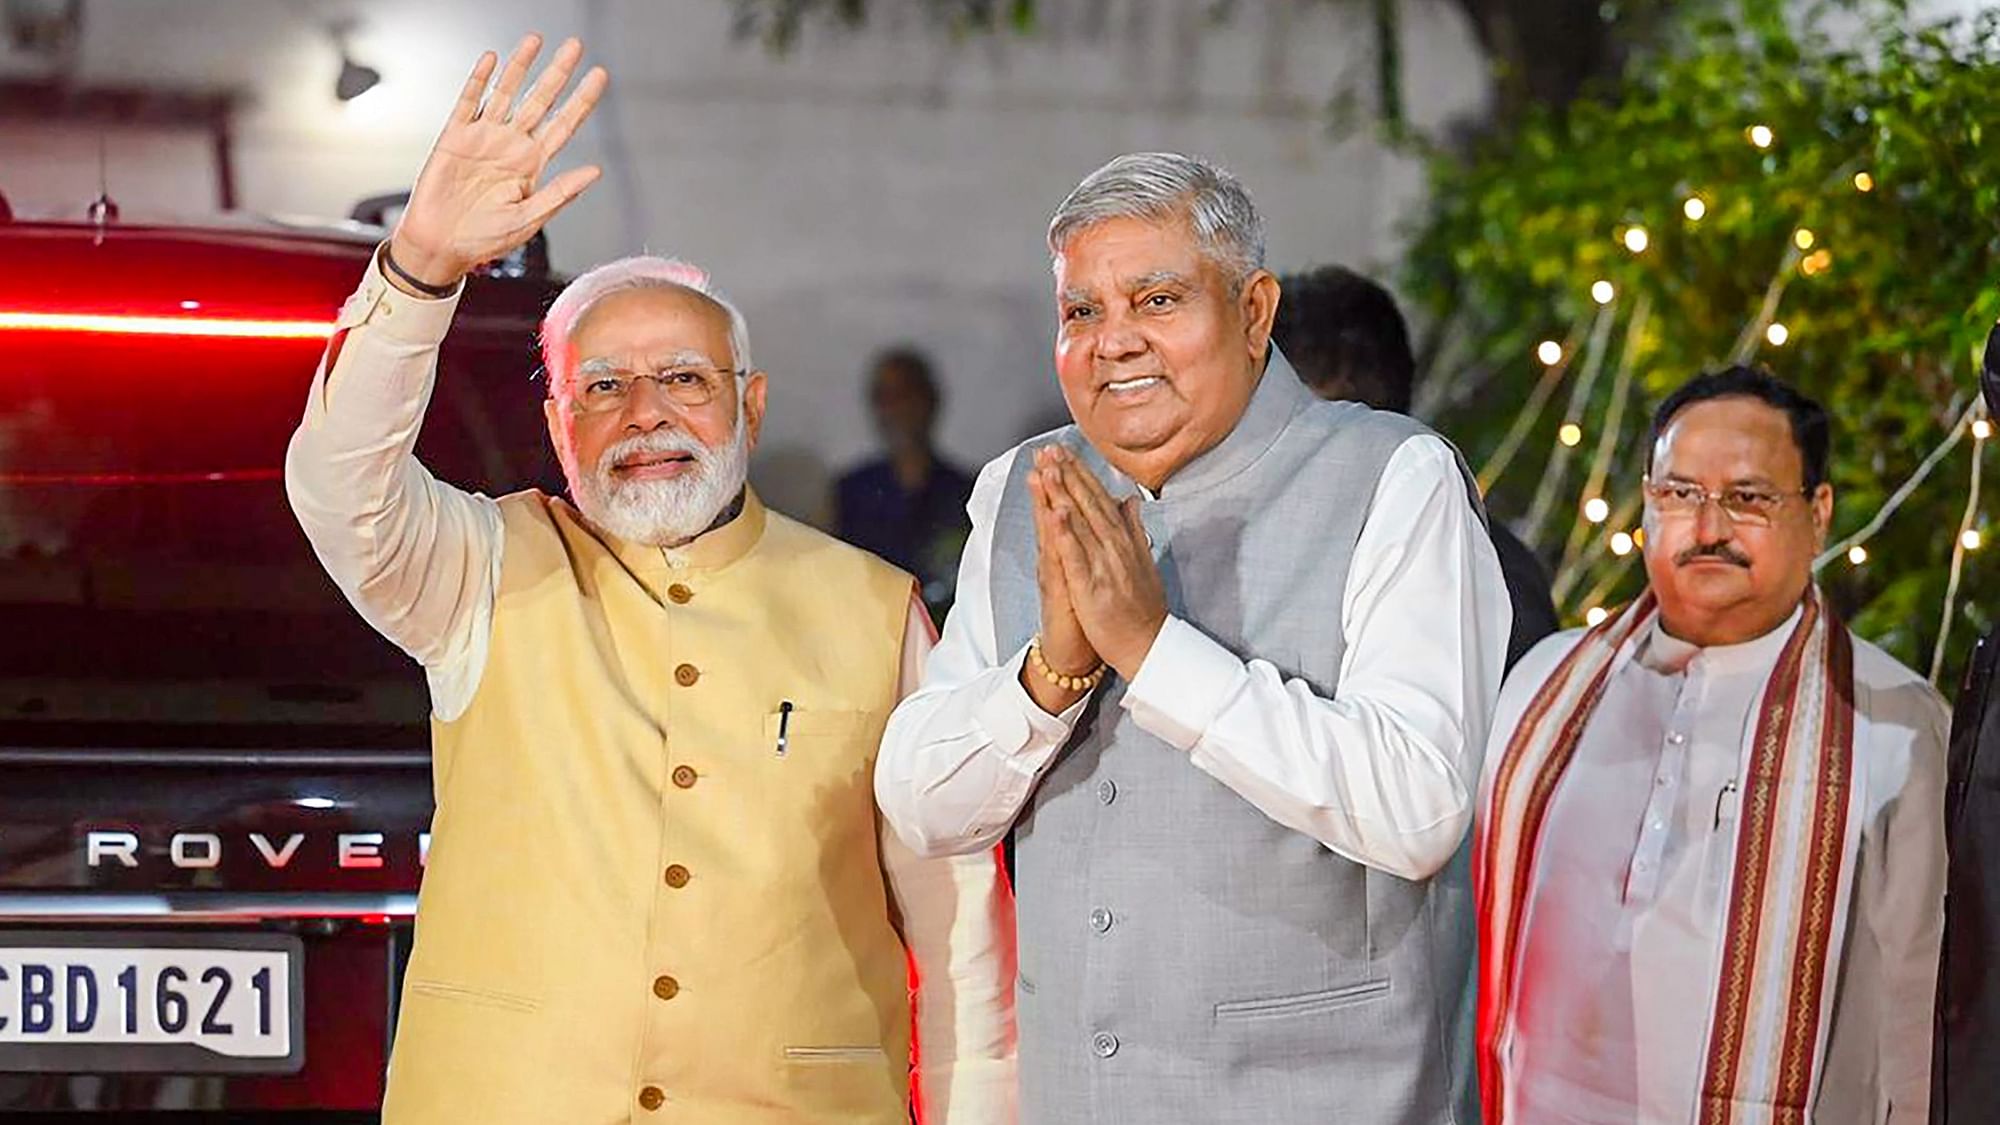 <div class="paragraphs"><p>National Democratic Alliance (NDA)'s Jagdeep Dhankhar has emerged victorious in the two-headed <a href="https://www.thequint.com/news/politics/vice-president-elections-2022-margaret-alva-jagdeep-dhankhar-both-lawyers-but-who-will-weigh-in-more-in-politics">Vice Presidential election</a> on Saturday, 6 August, defeating the Opposition candidate Margaret Alva.</p></div>